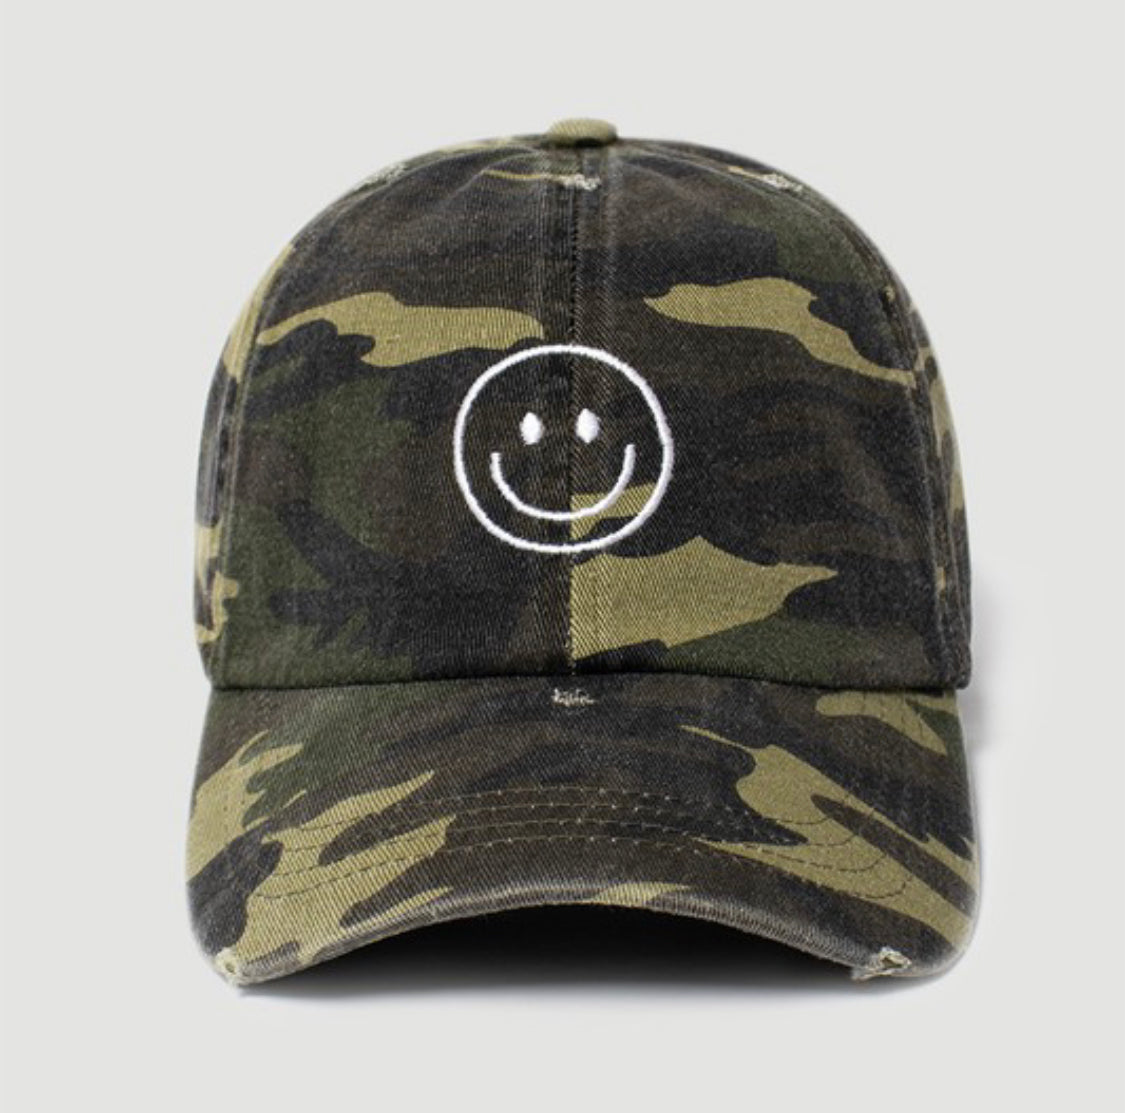 Just Smile Caeley Camo Hat